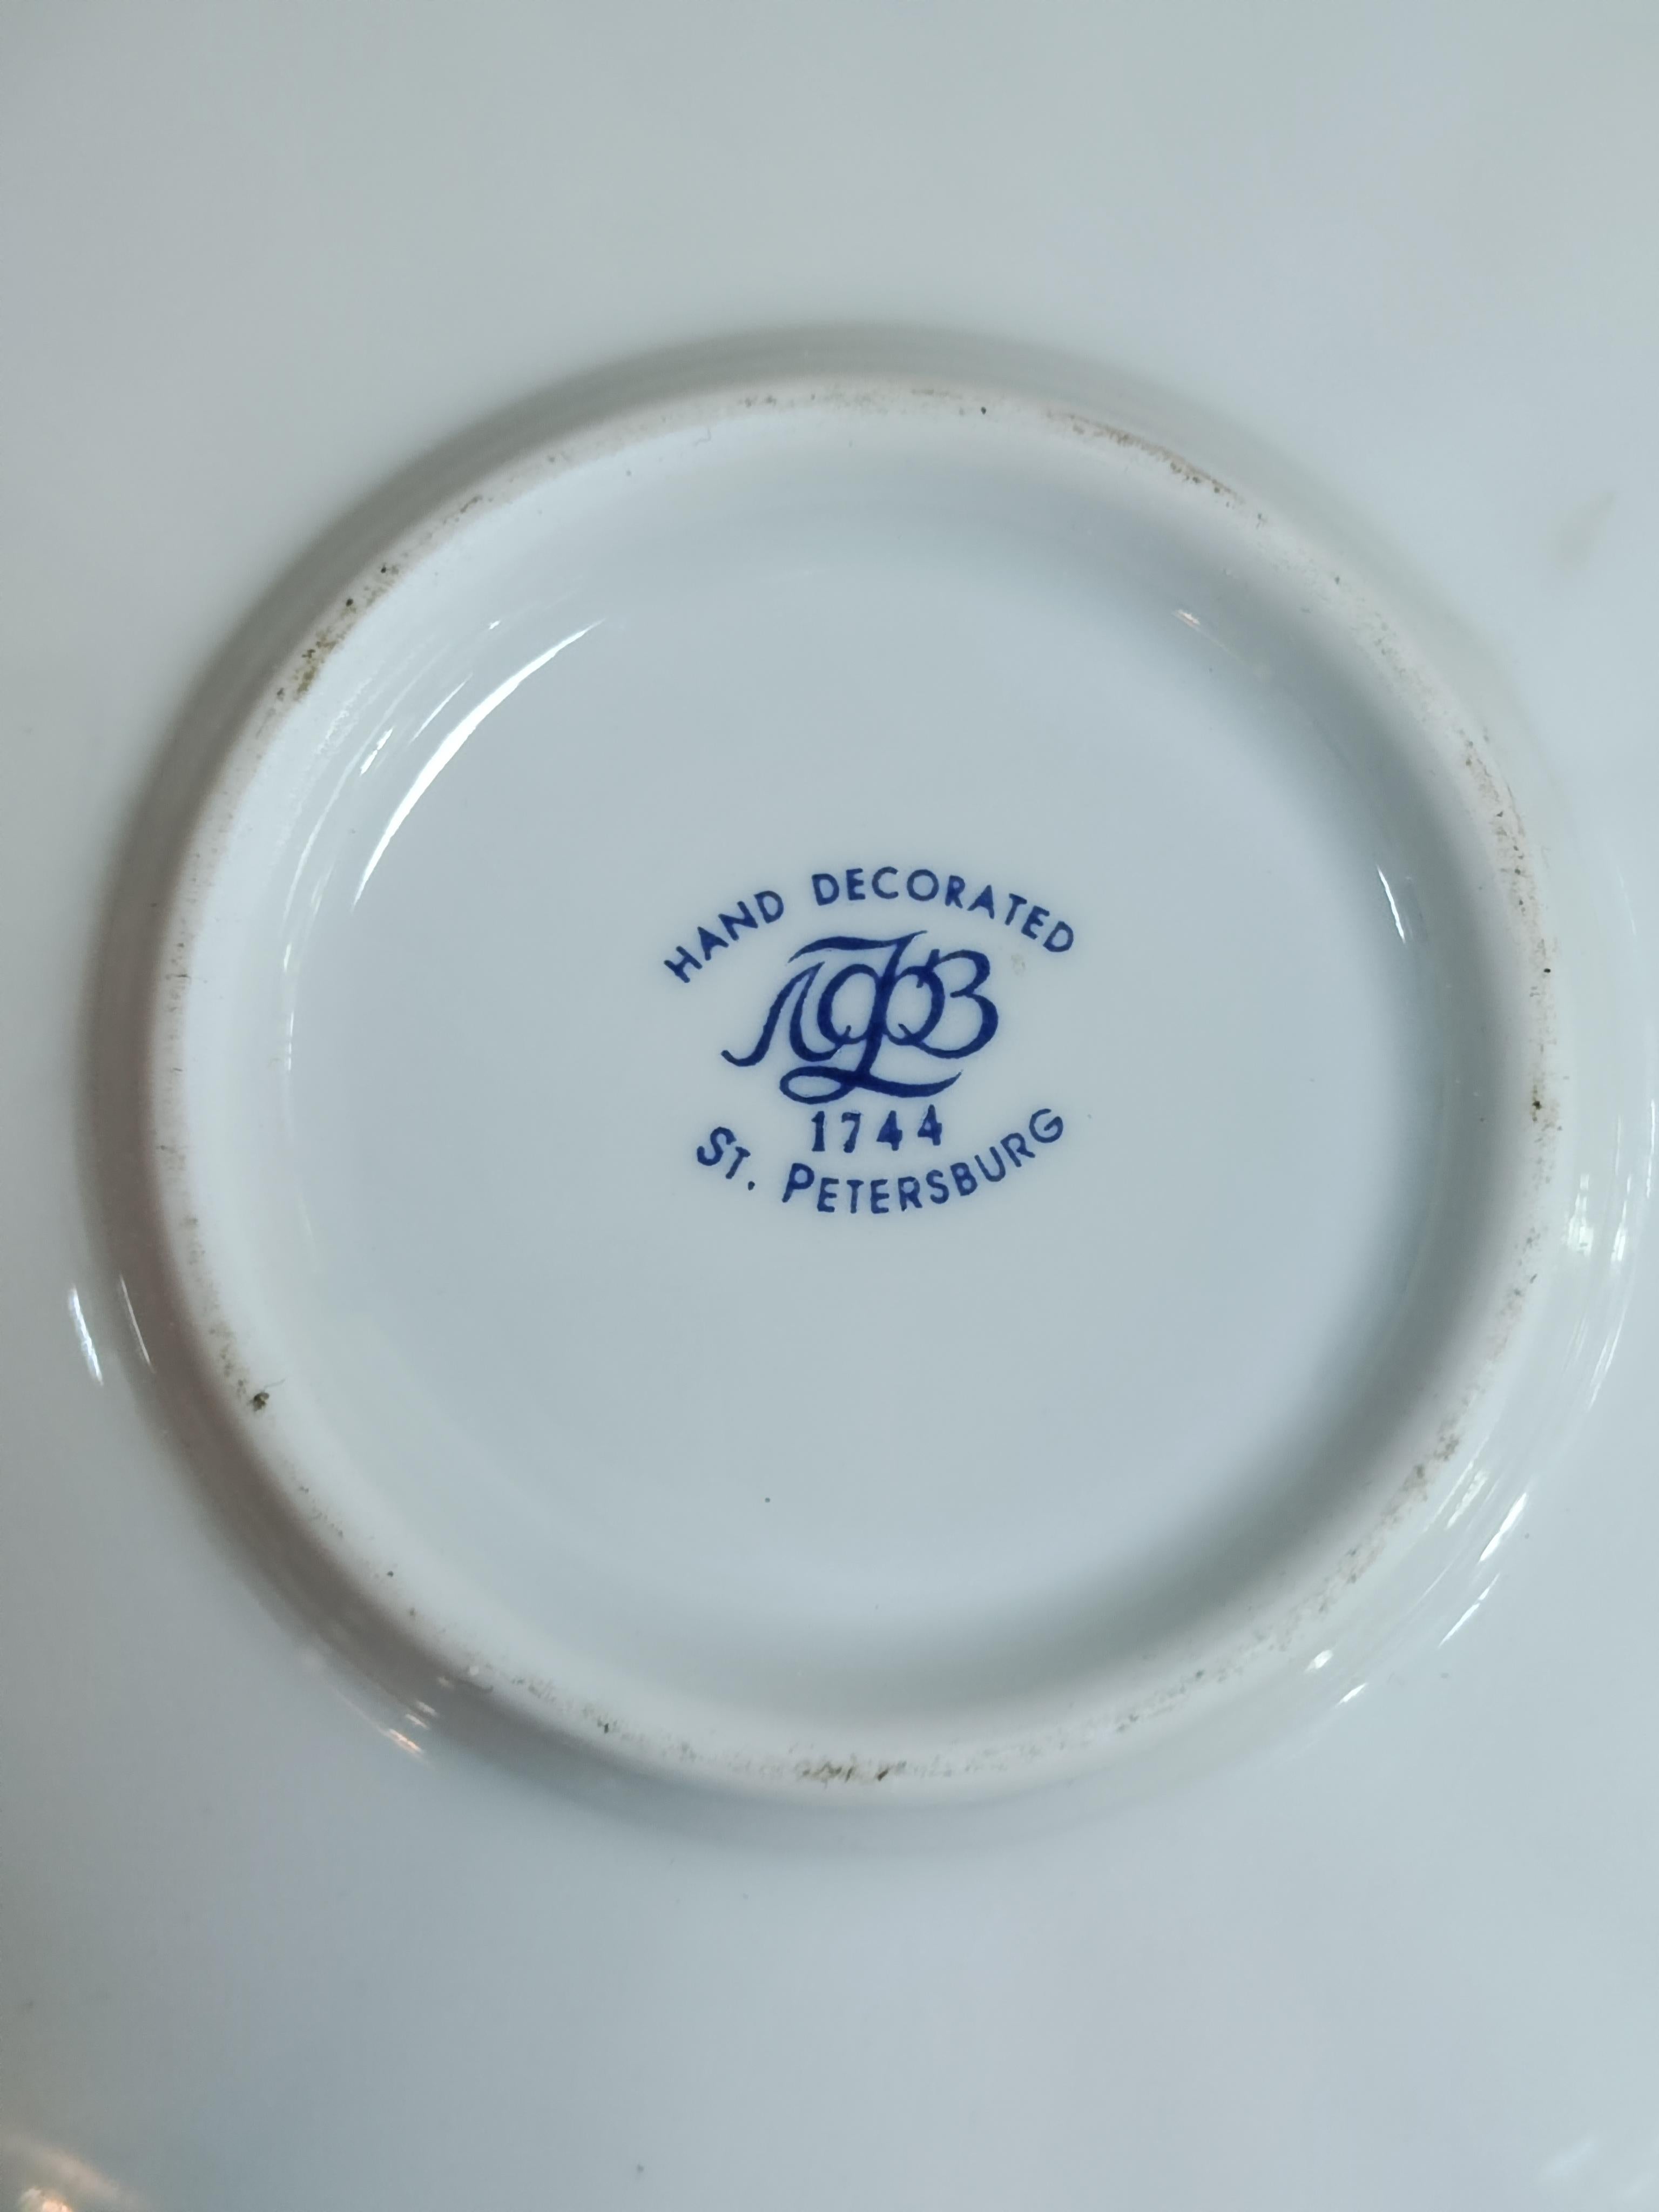 In this listing you will find a set of 6 vintage porcelain tea cups with saucers, manufactured by Russian Imperial Porcelain manufacturer Lomonosov. Tea Cups are hand decorated with Bluebells. Made in USSR in 1960s.

Excellent condition with no